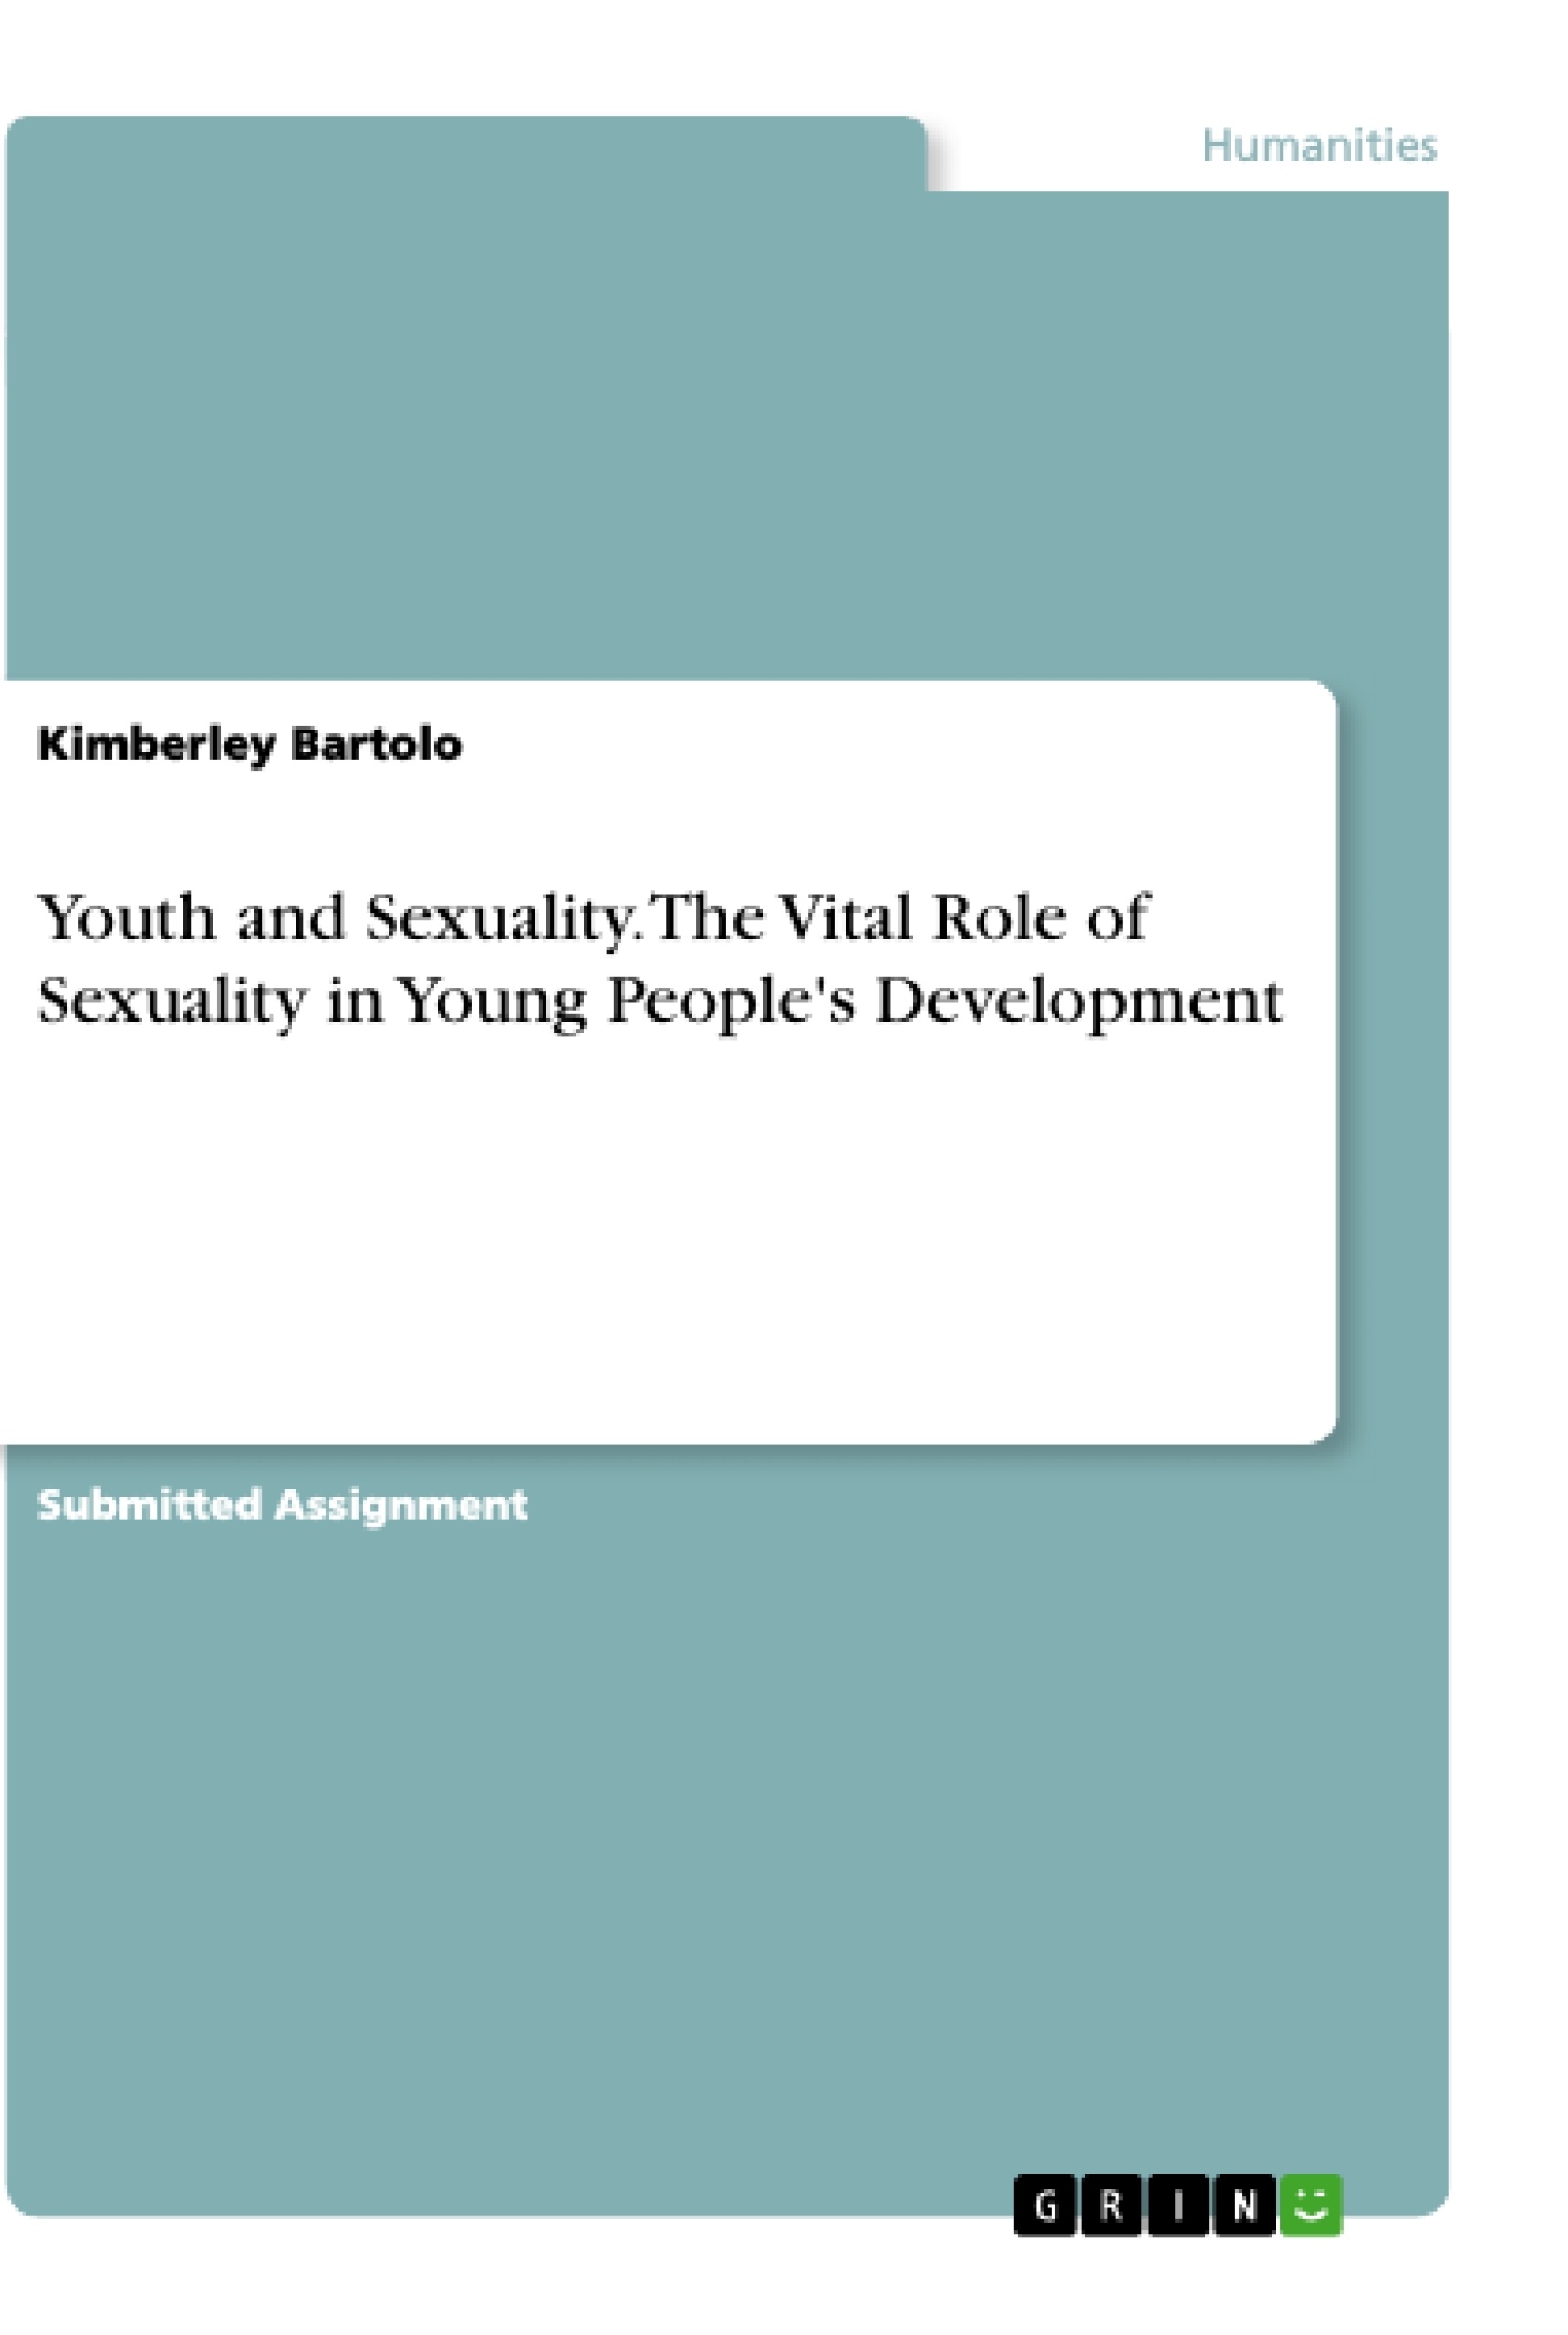 Título: Youth and Sexuality. The Vital Role of Sexuality in Young People's Development